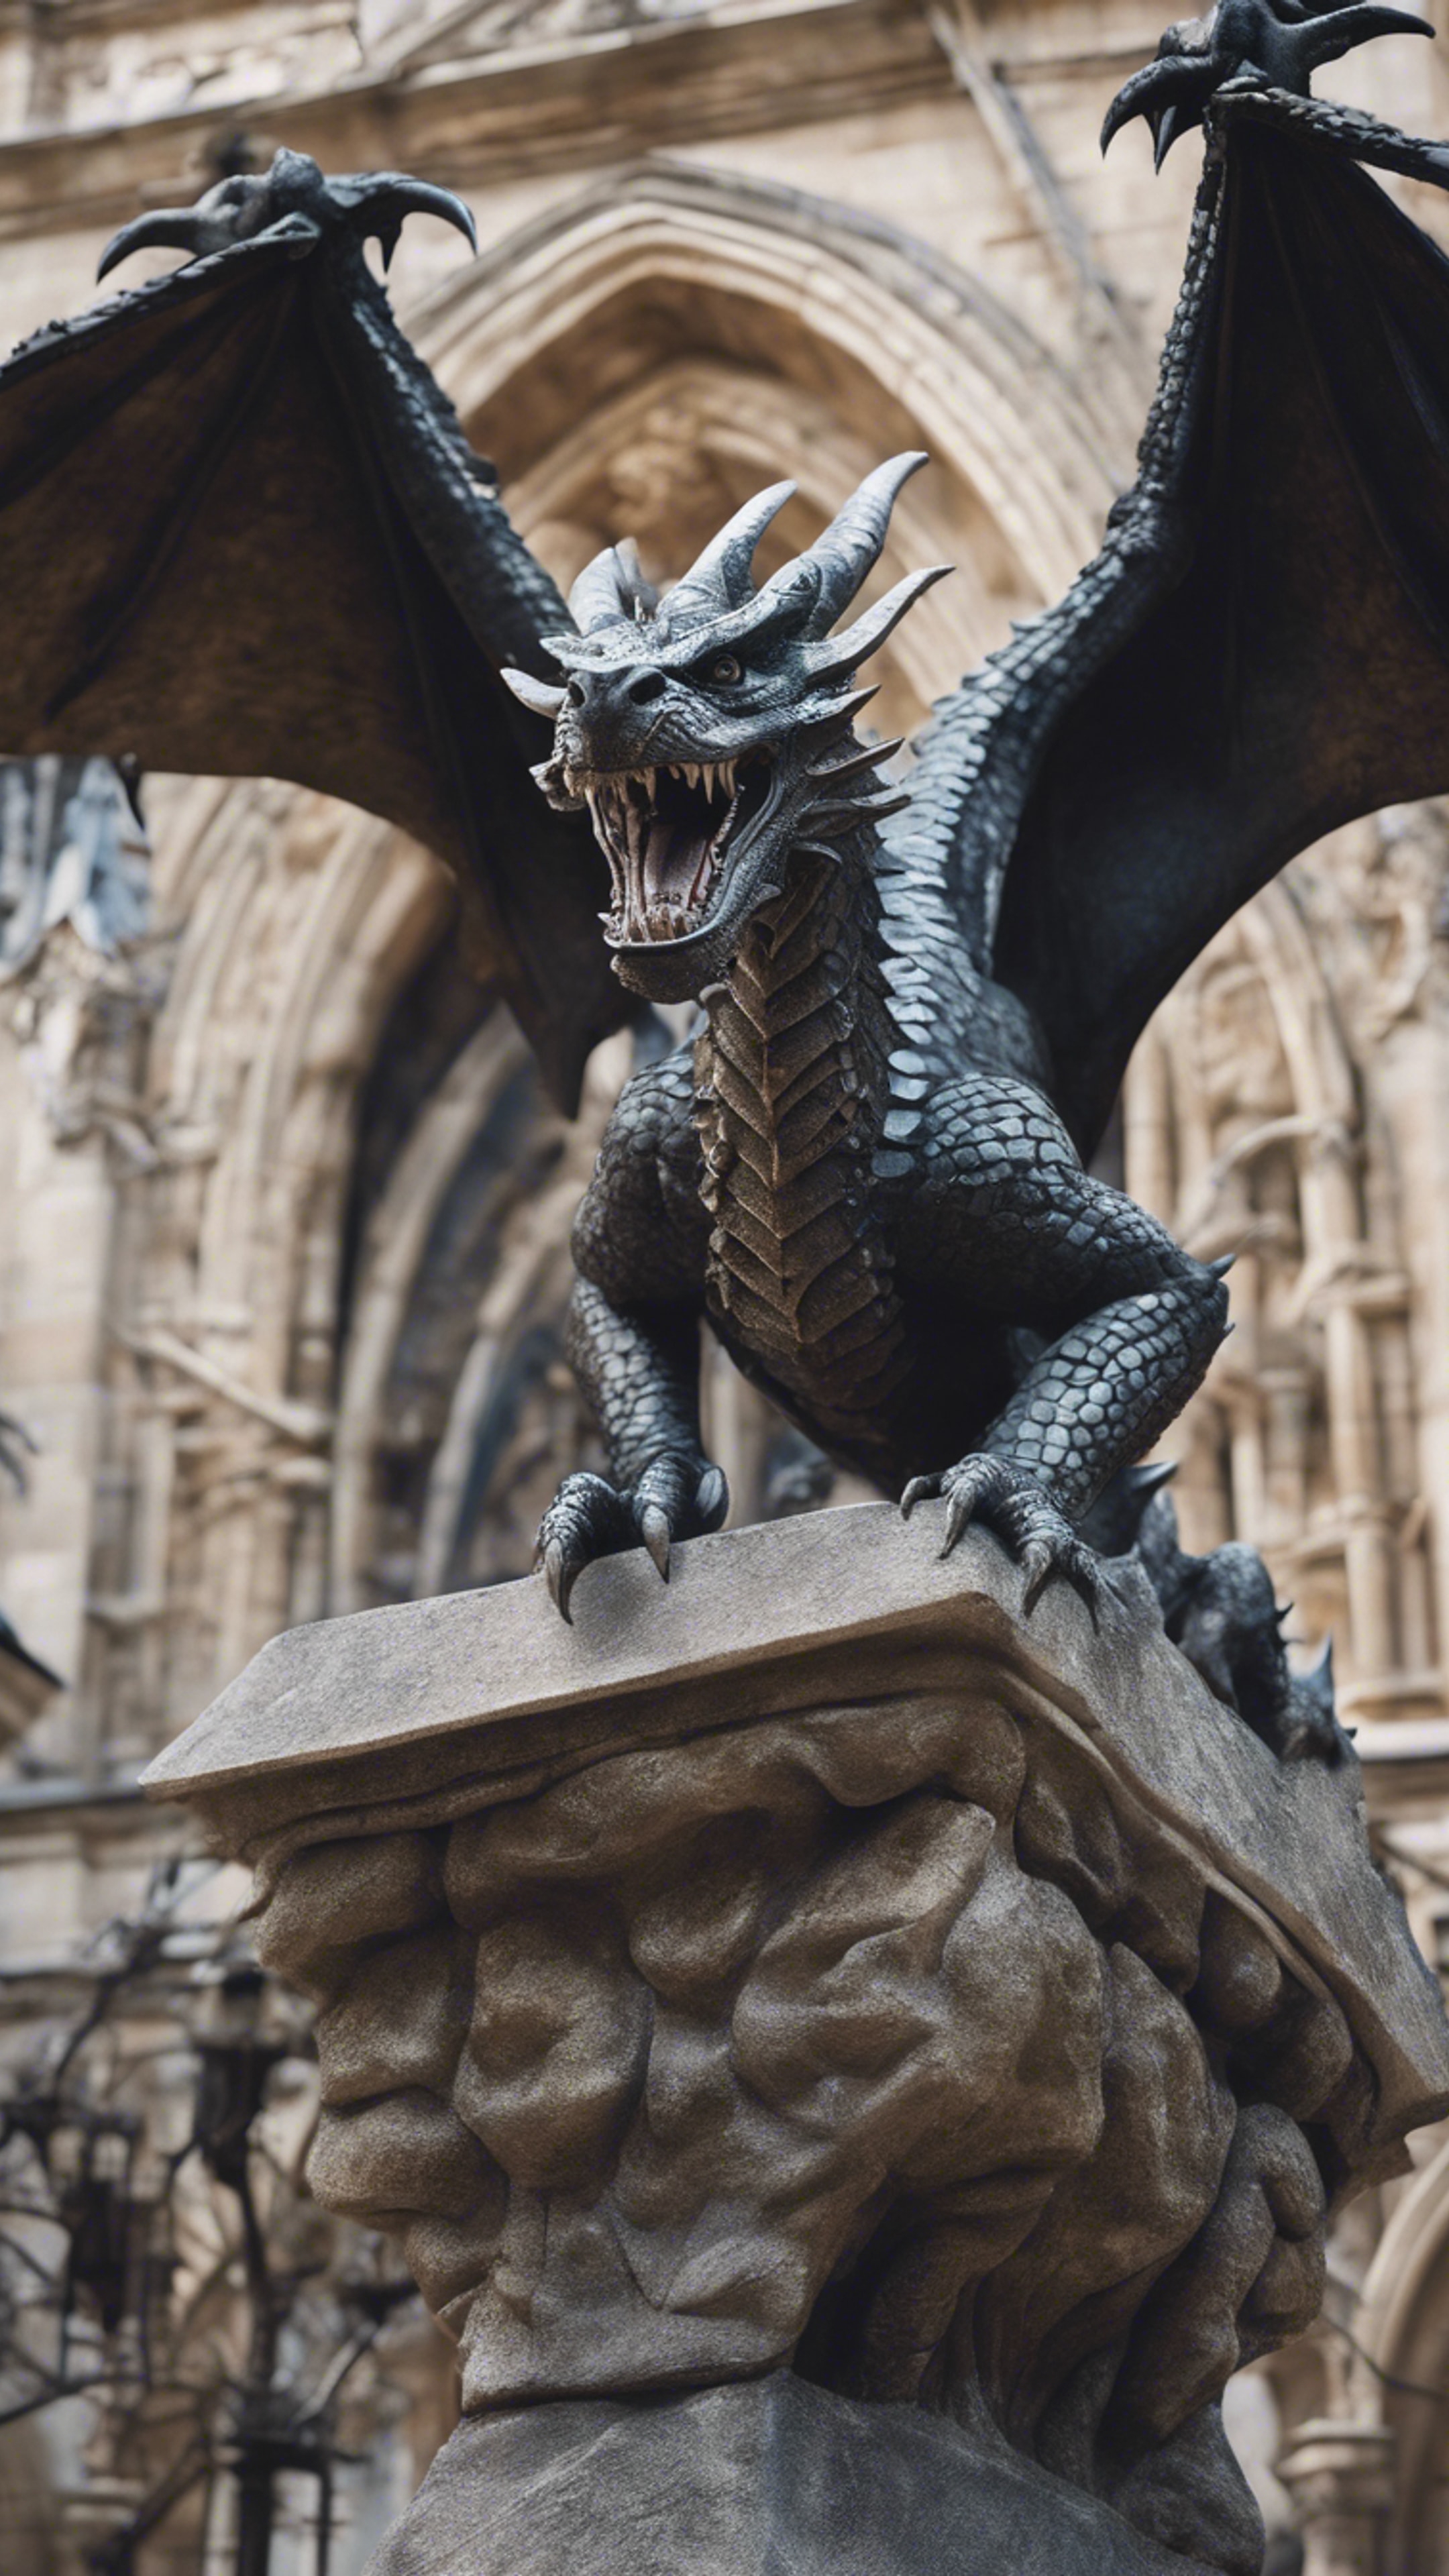 A stone dragon coming to life from the sculpture in a gothic cathedral's courtyard. Fondo de pantalla[86d9df9db55943e58db6]